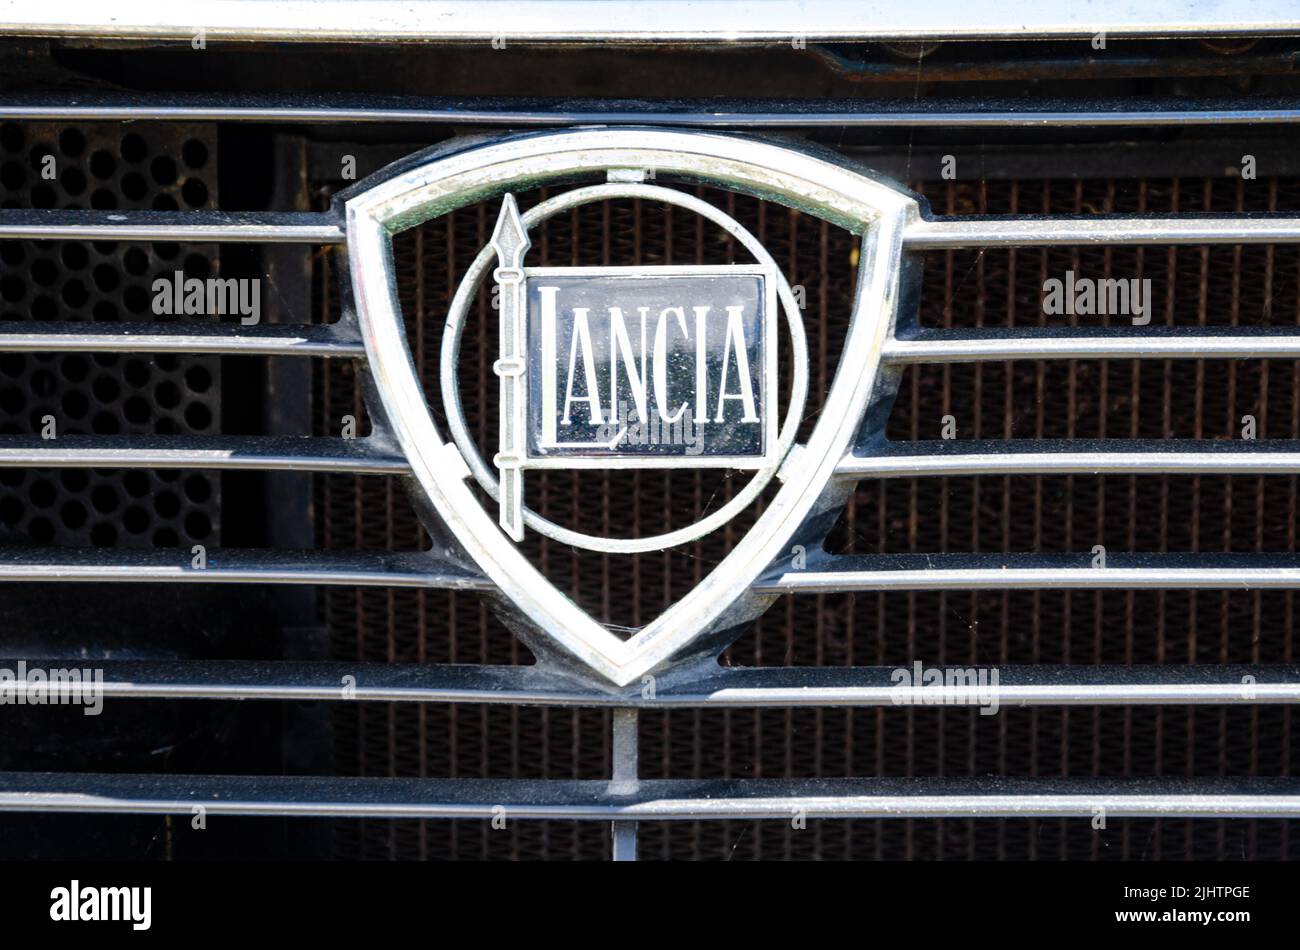 Close up view of a Lancia badge on the front grill of a classic Lancia car at The Berkshire Motor Show in Reading, UK Stock Photo